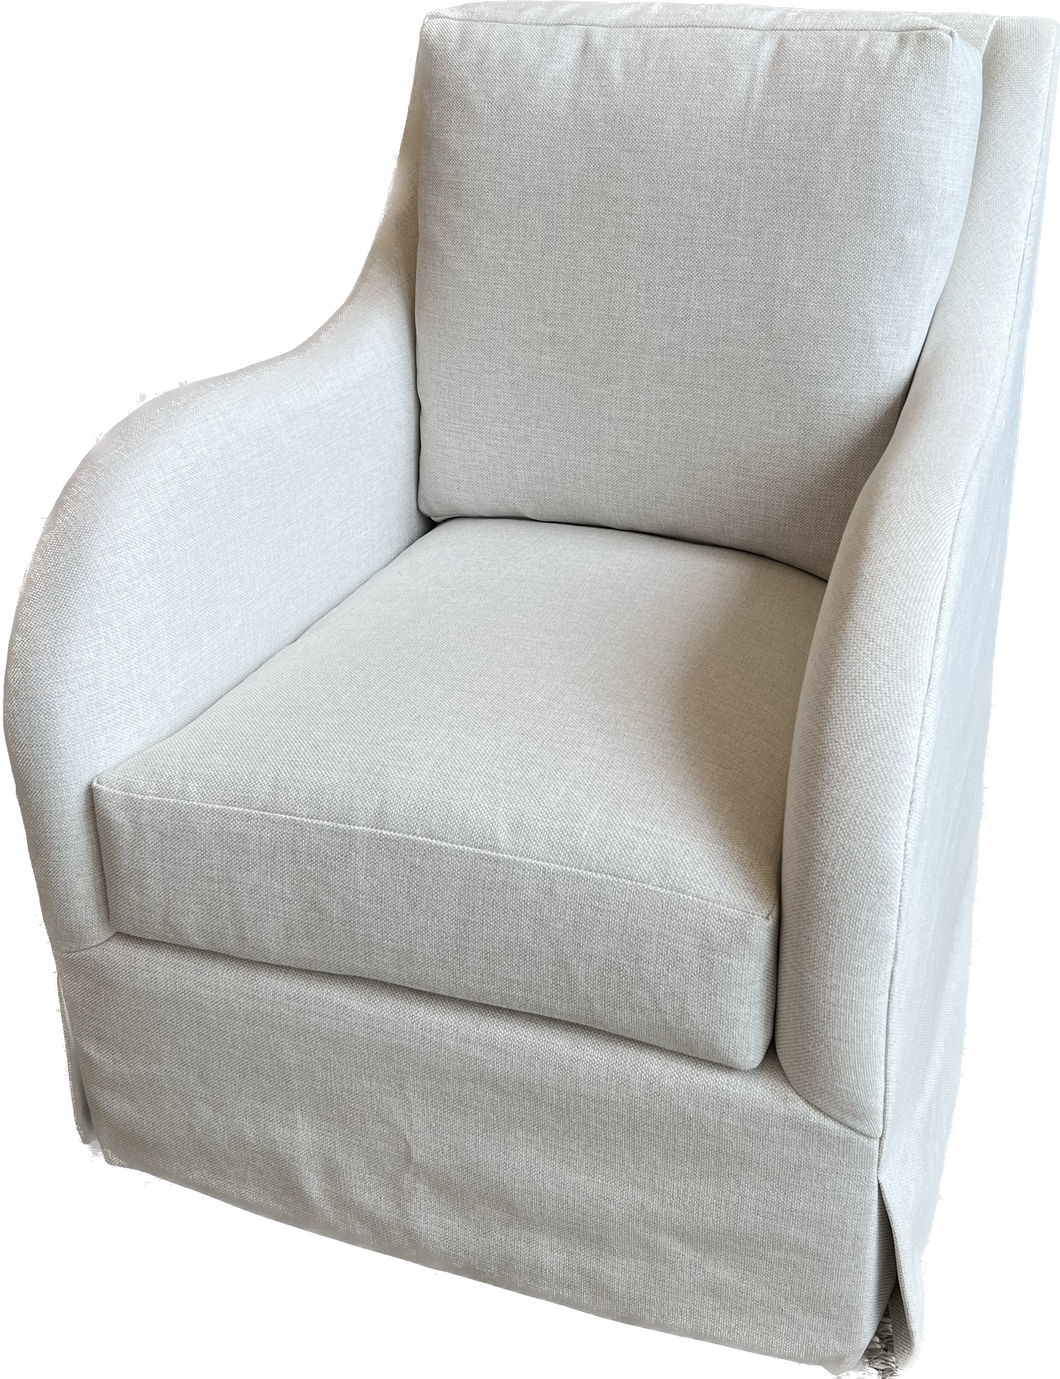 Claire Swivel Chair - Hailey Cotton Performance Fabric